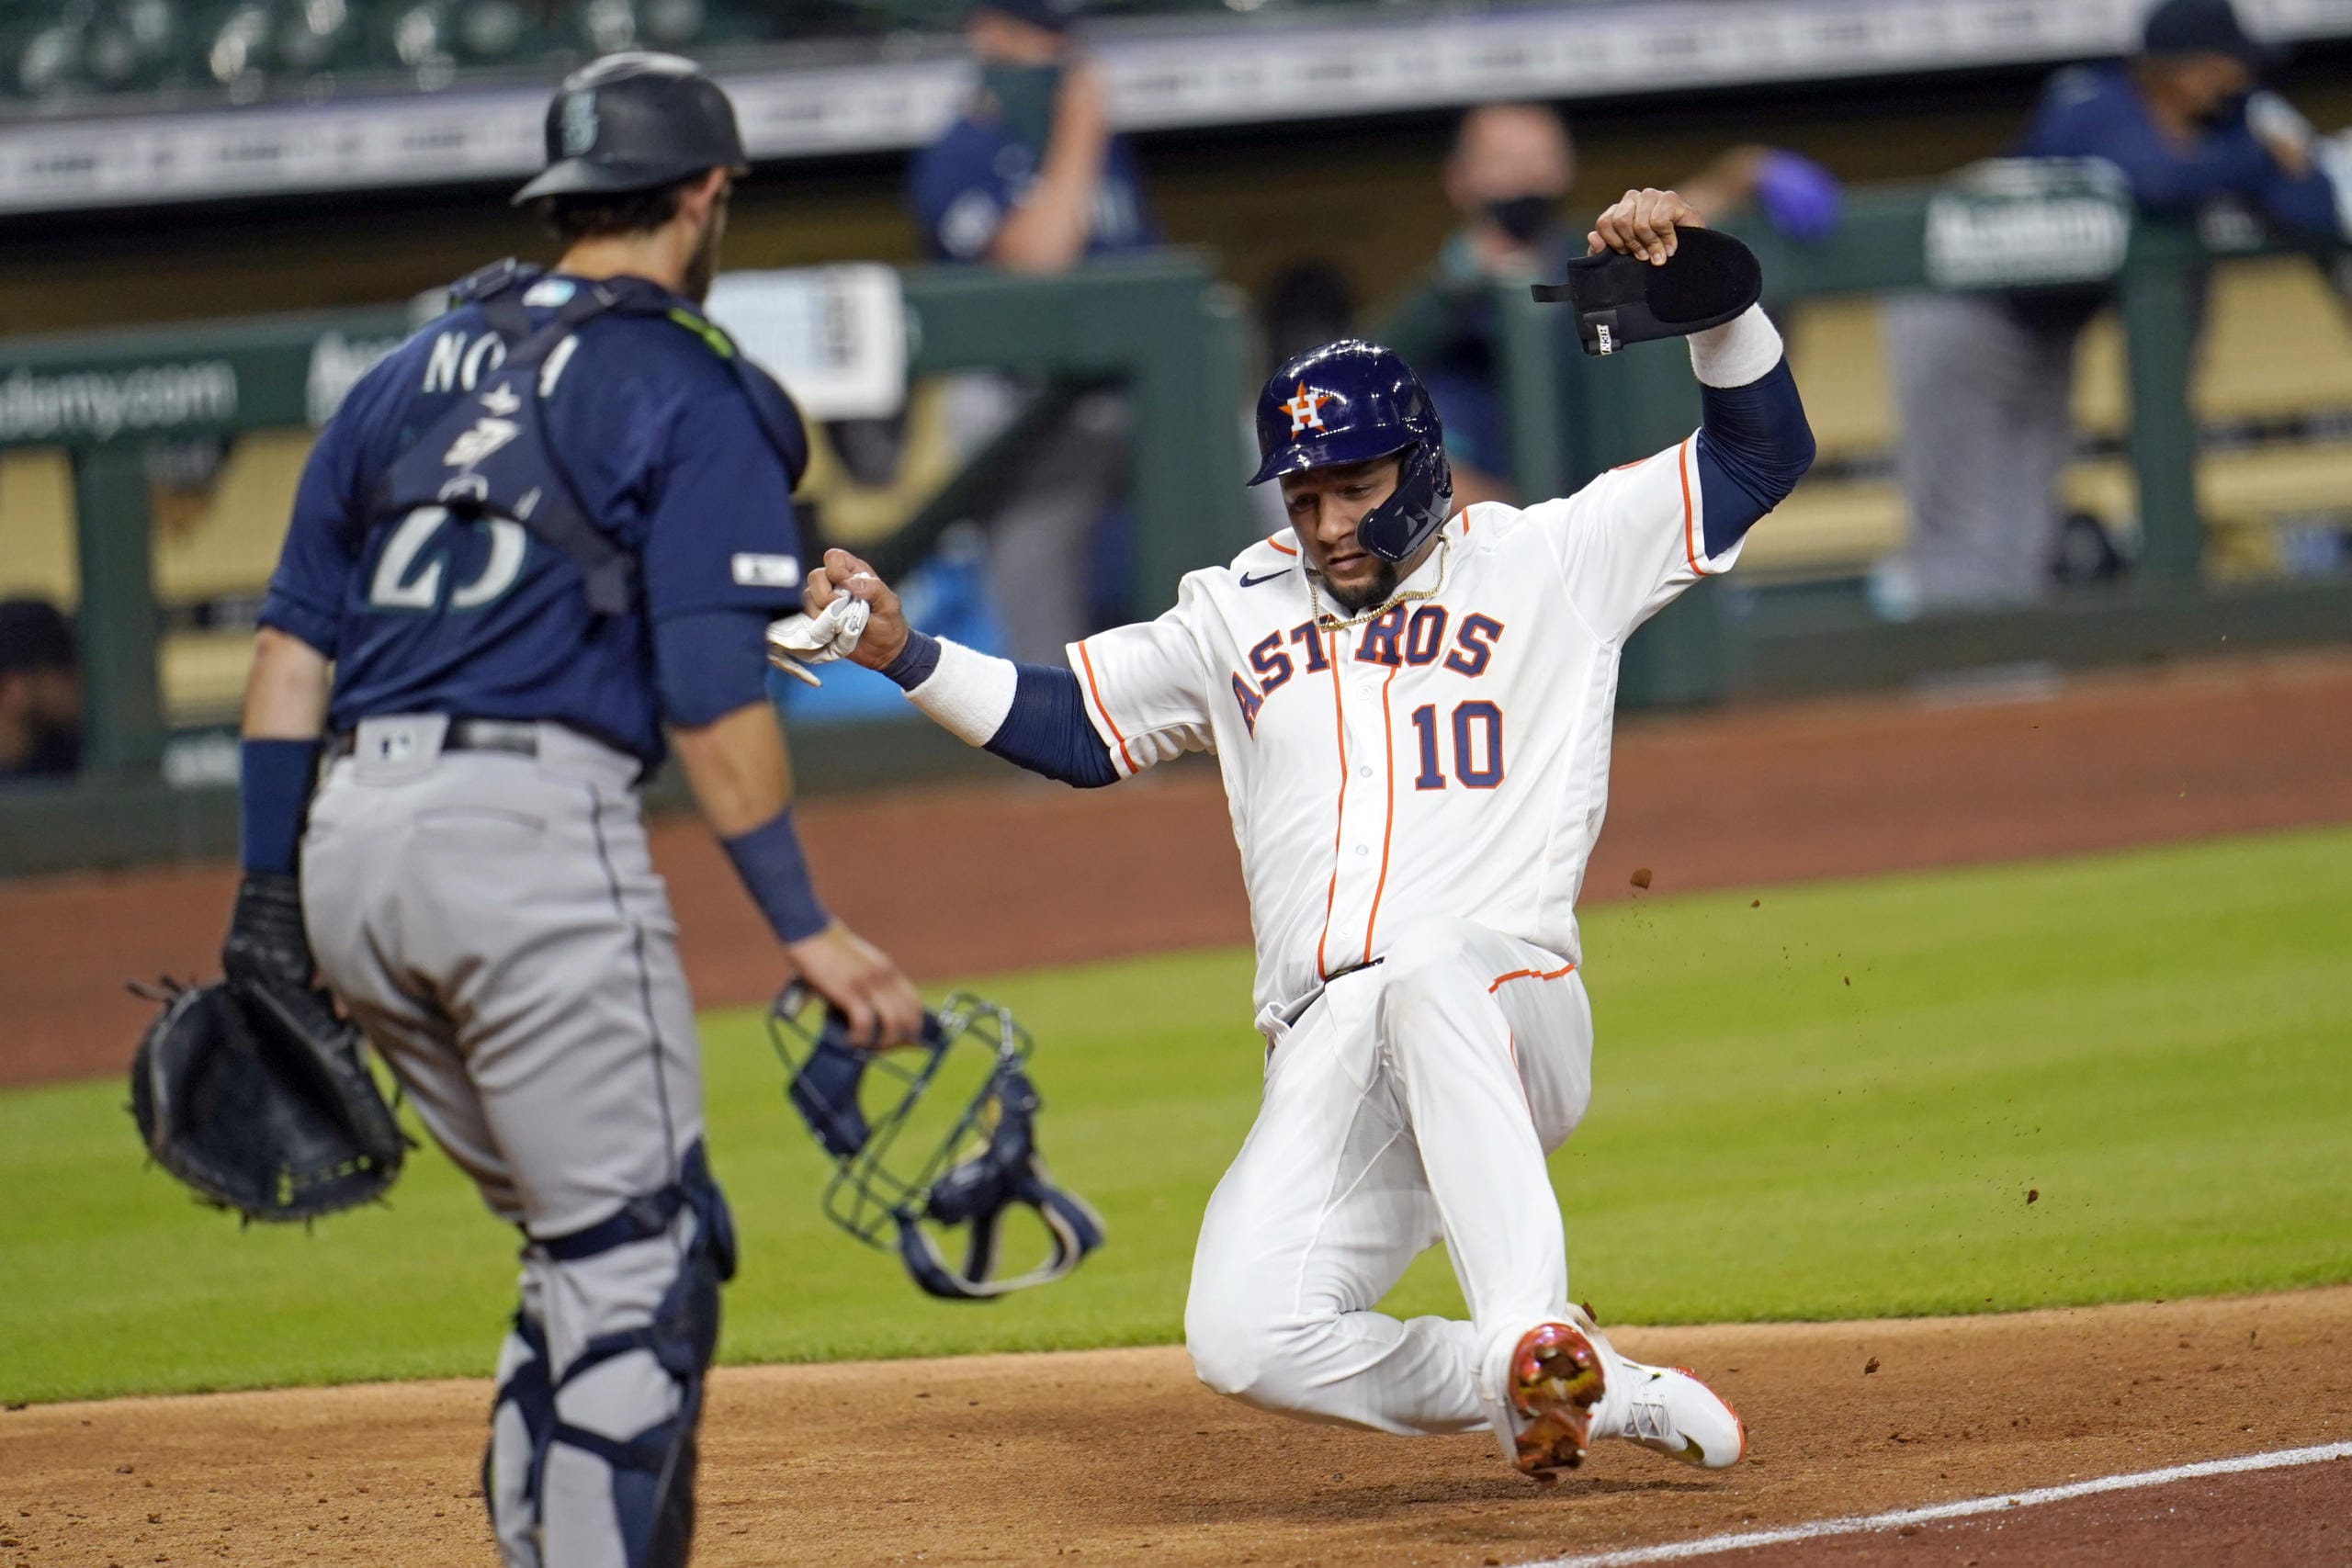 Houston Astros' Yuli Gurriel (10) scores as Seattle Mariners catcher Austin Nola looks on during the seventh inning of a baseball game Friday, July 24, 2020, in Houston. (AP Photo/David J.